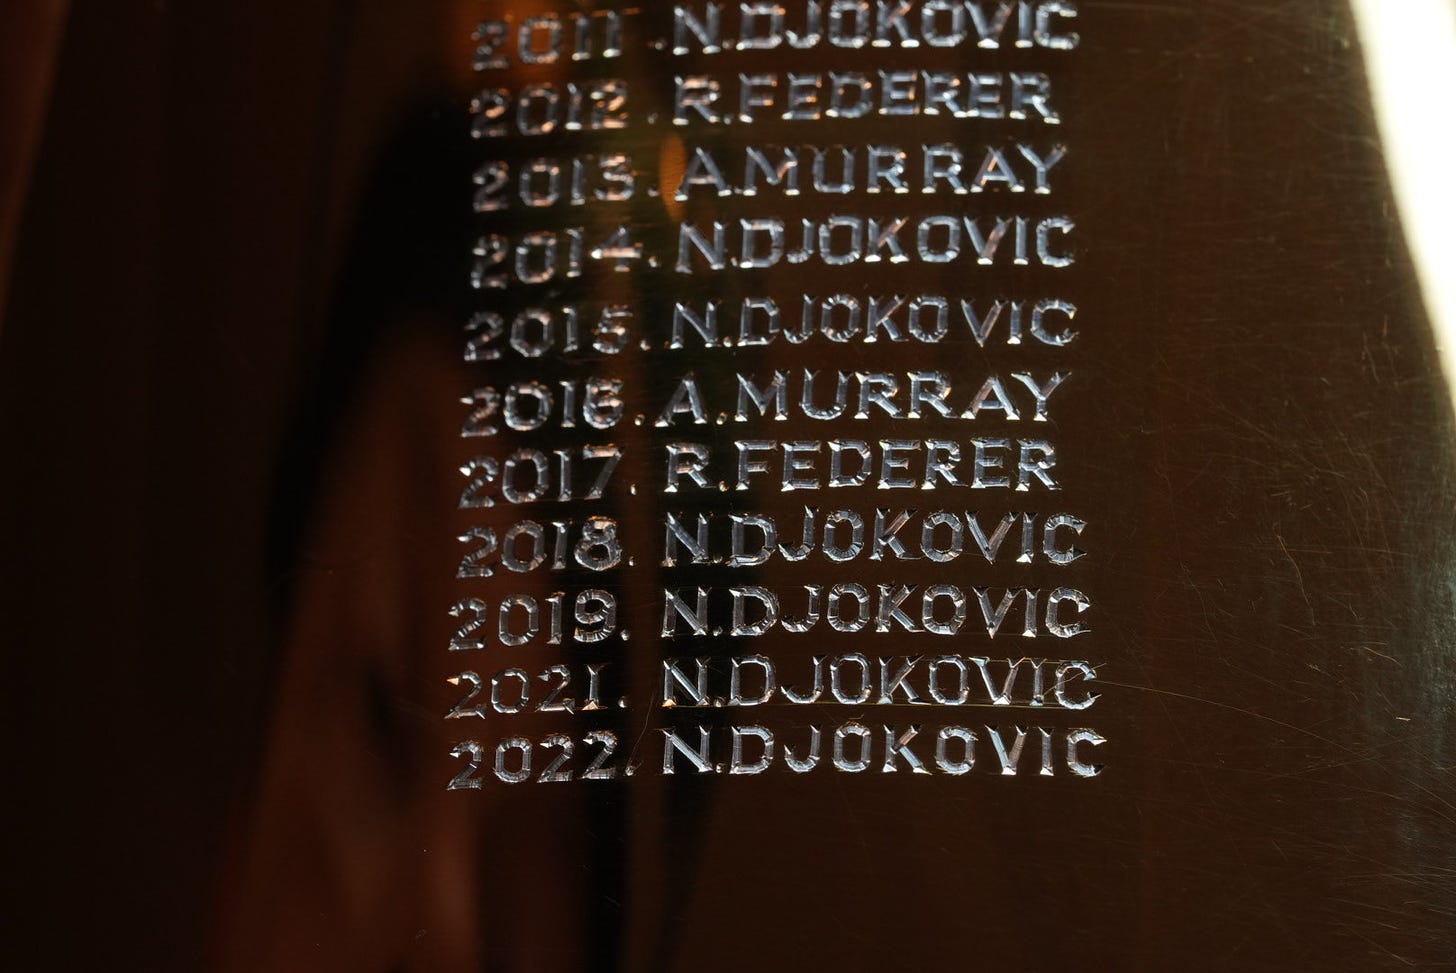 Novak Djokovic's name is engraved on the trophy once again